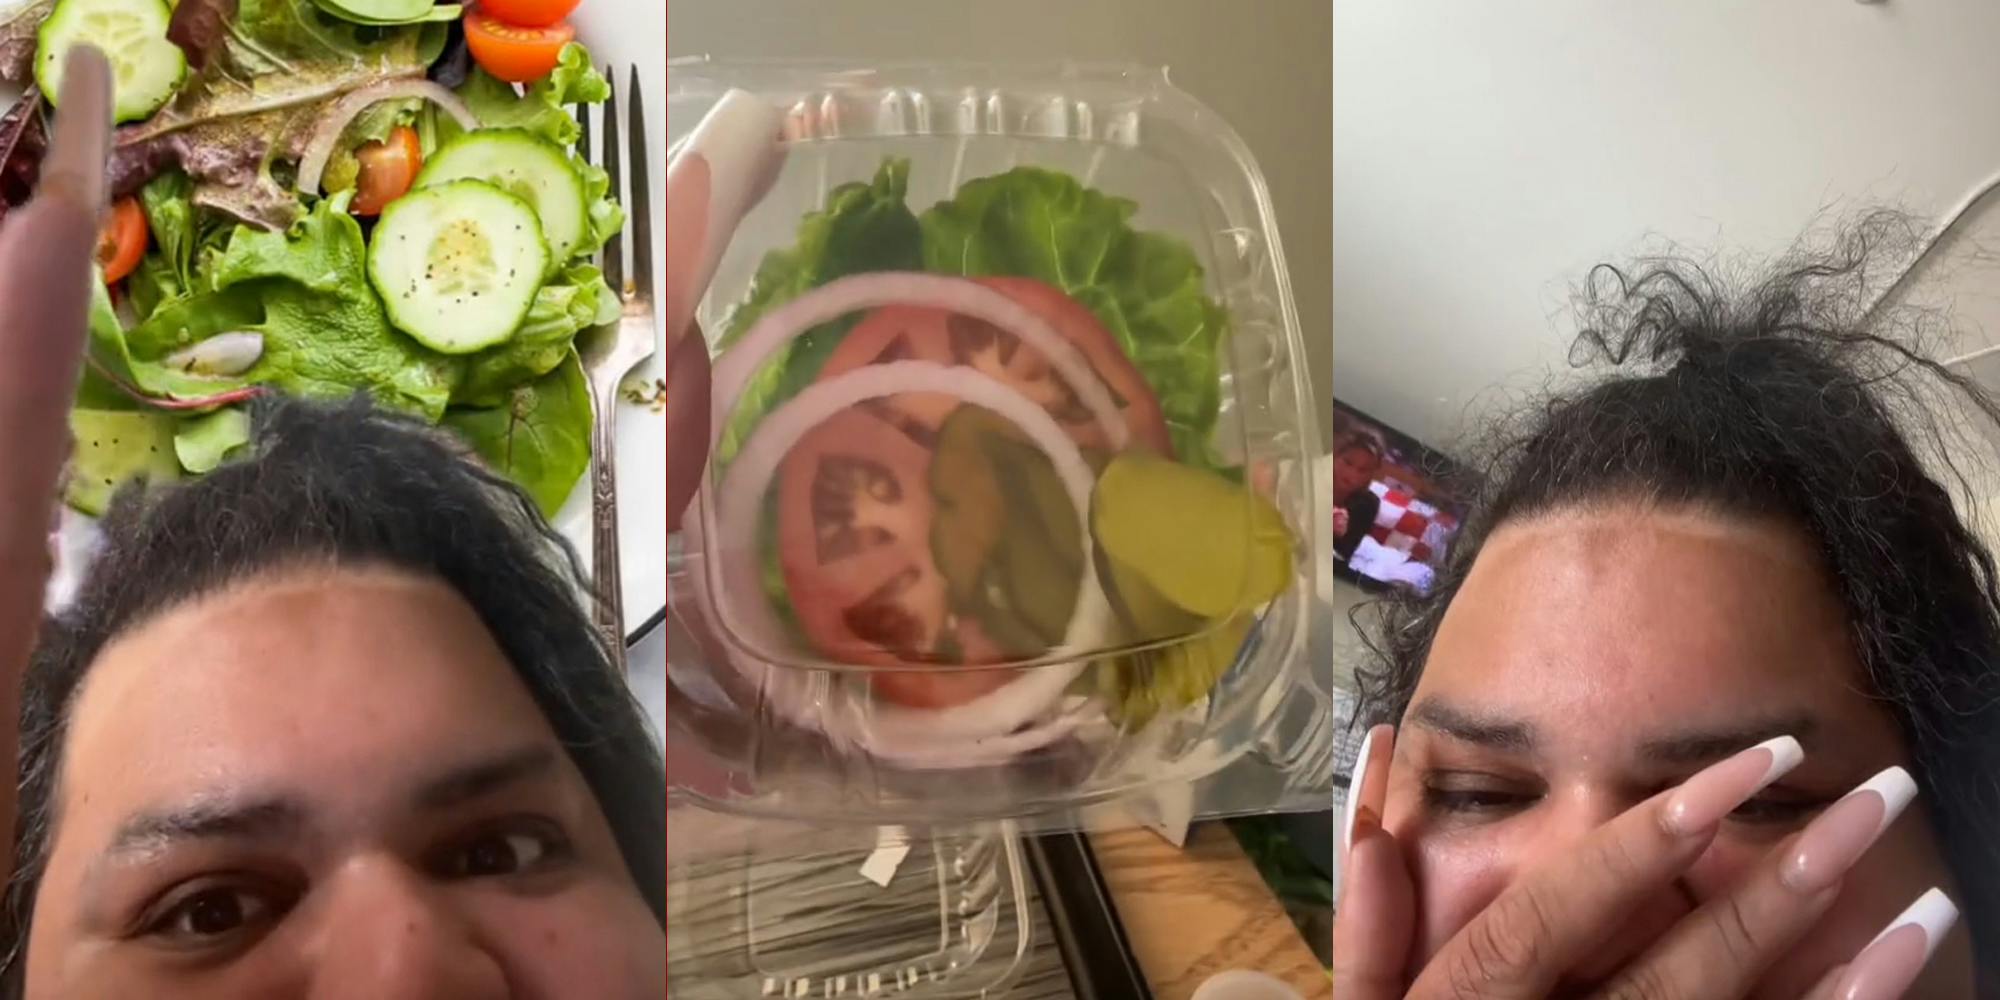 hospital patient greenscreen TikTok over image of expected salad (l) hospital patient holding up small side salad (c) hospital patient laughing with hand on mouth (r)